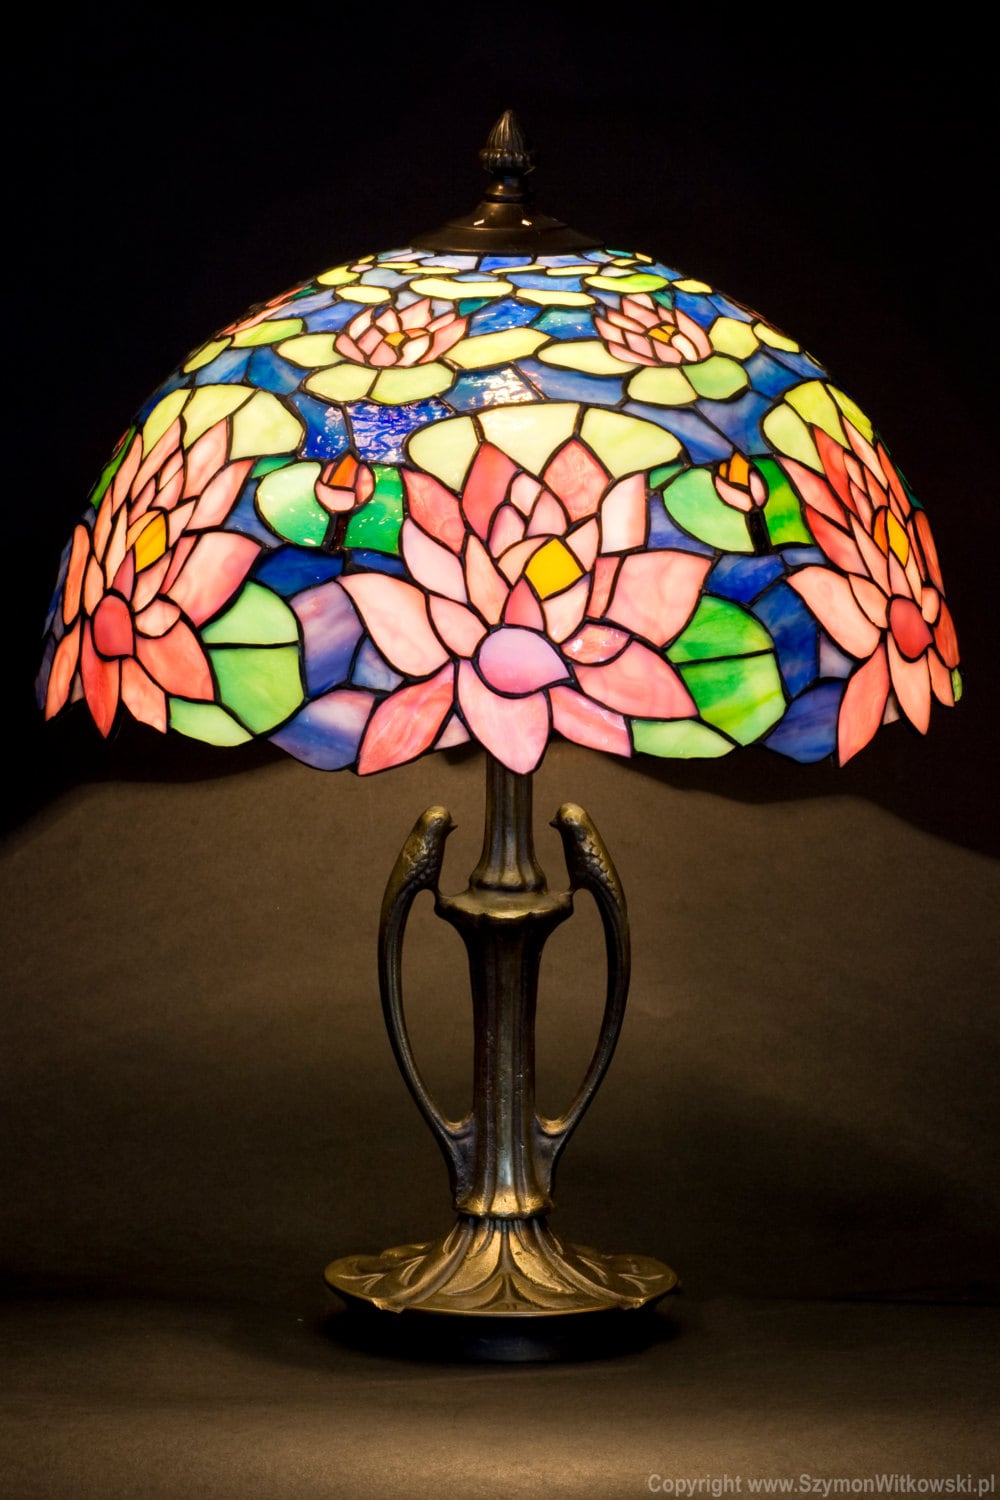 Stained Glass Art Stained Glass Table Lamp Stained Glass Shade Table Lamp Desk Lamp Bedside